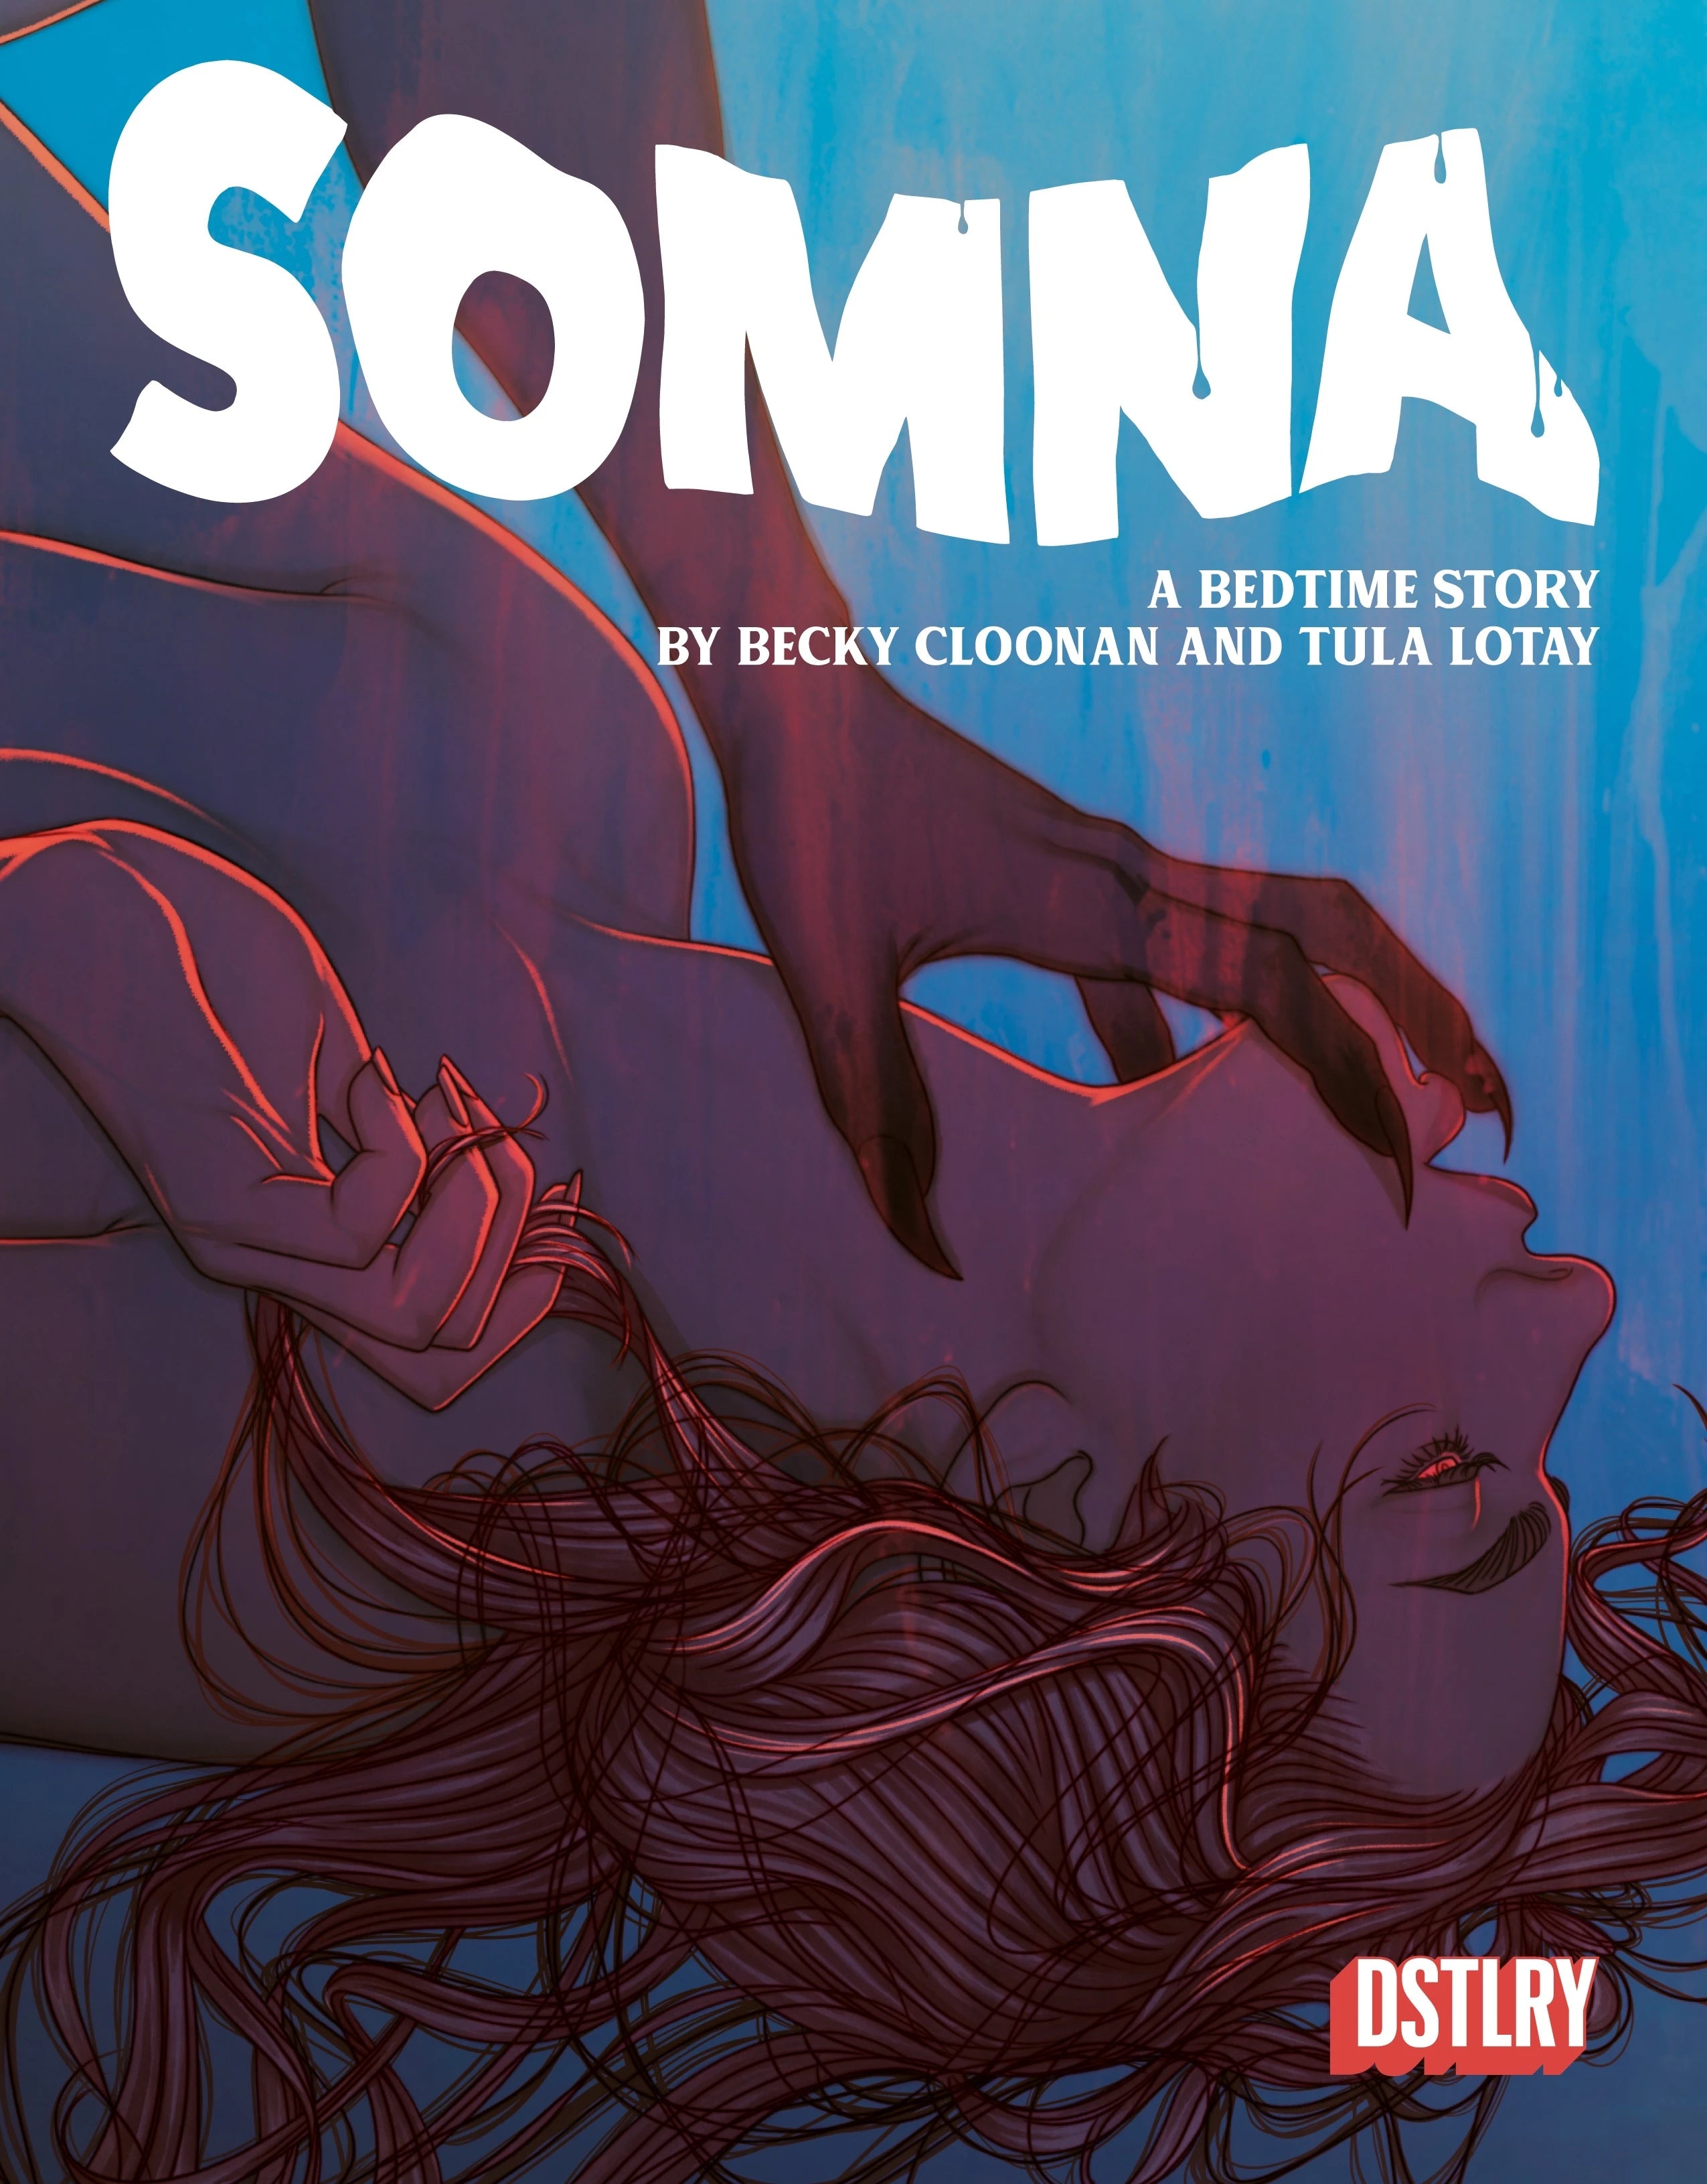 Somna Cover Gallery